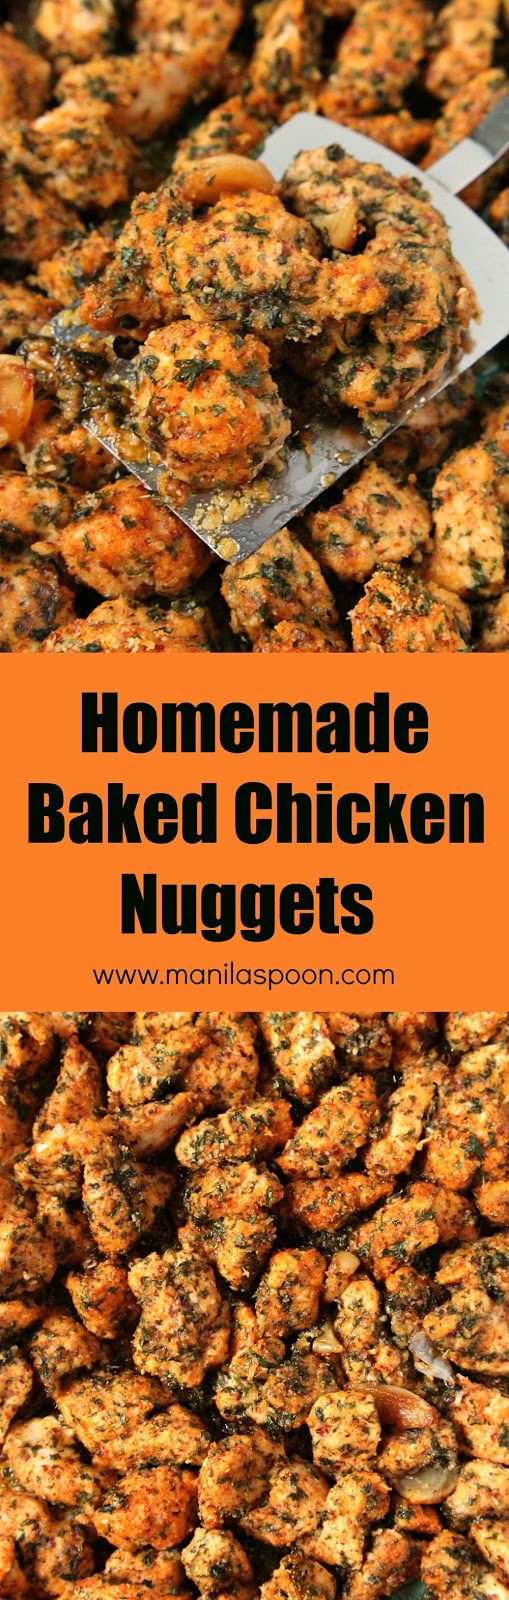 Kids and adults will both love this delicious and healthier Homemade Chicken Nuggets. Regular and gluten-free options here, too. Both are equally yummy! | manilaspoon.com